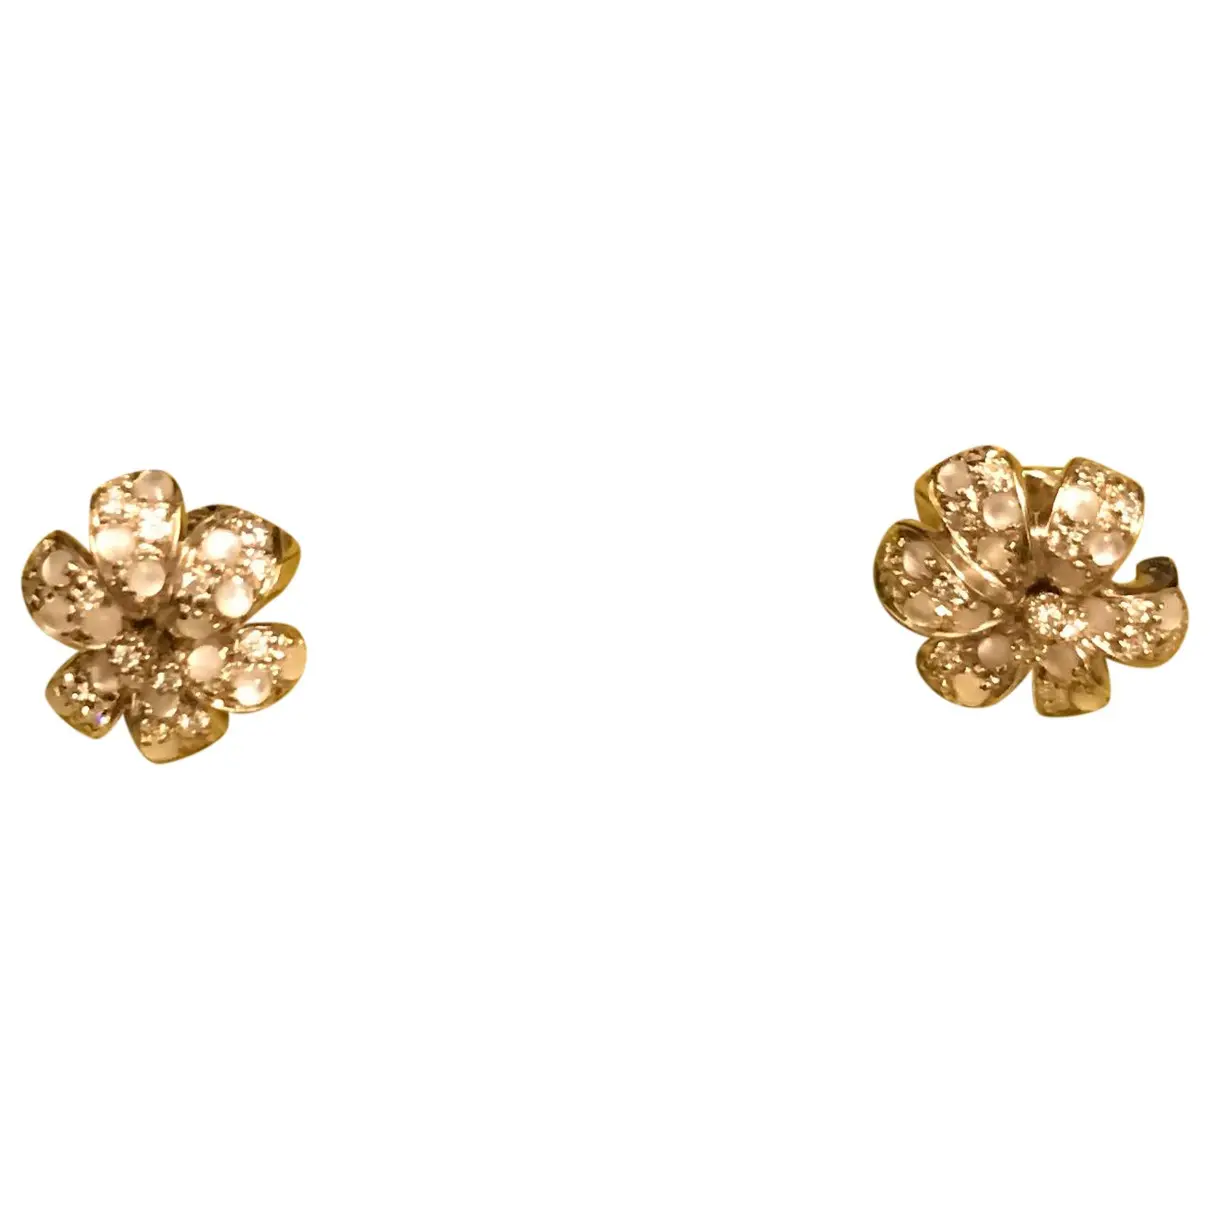 Gucci Flora white gold earrings